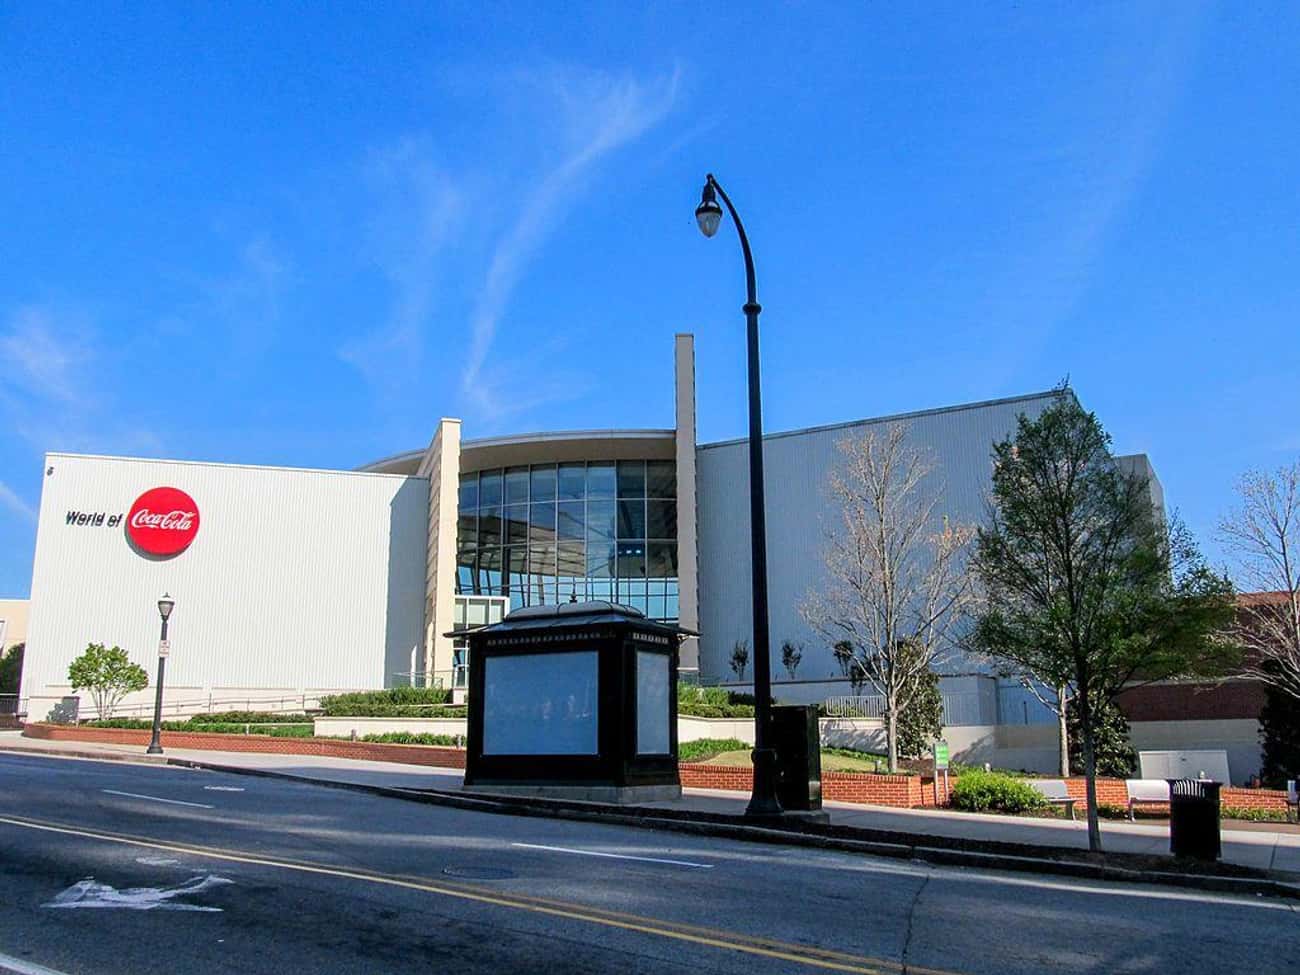 The Original Formula Now Resides At The World Of Coca-Cola Museum In Atlanta